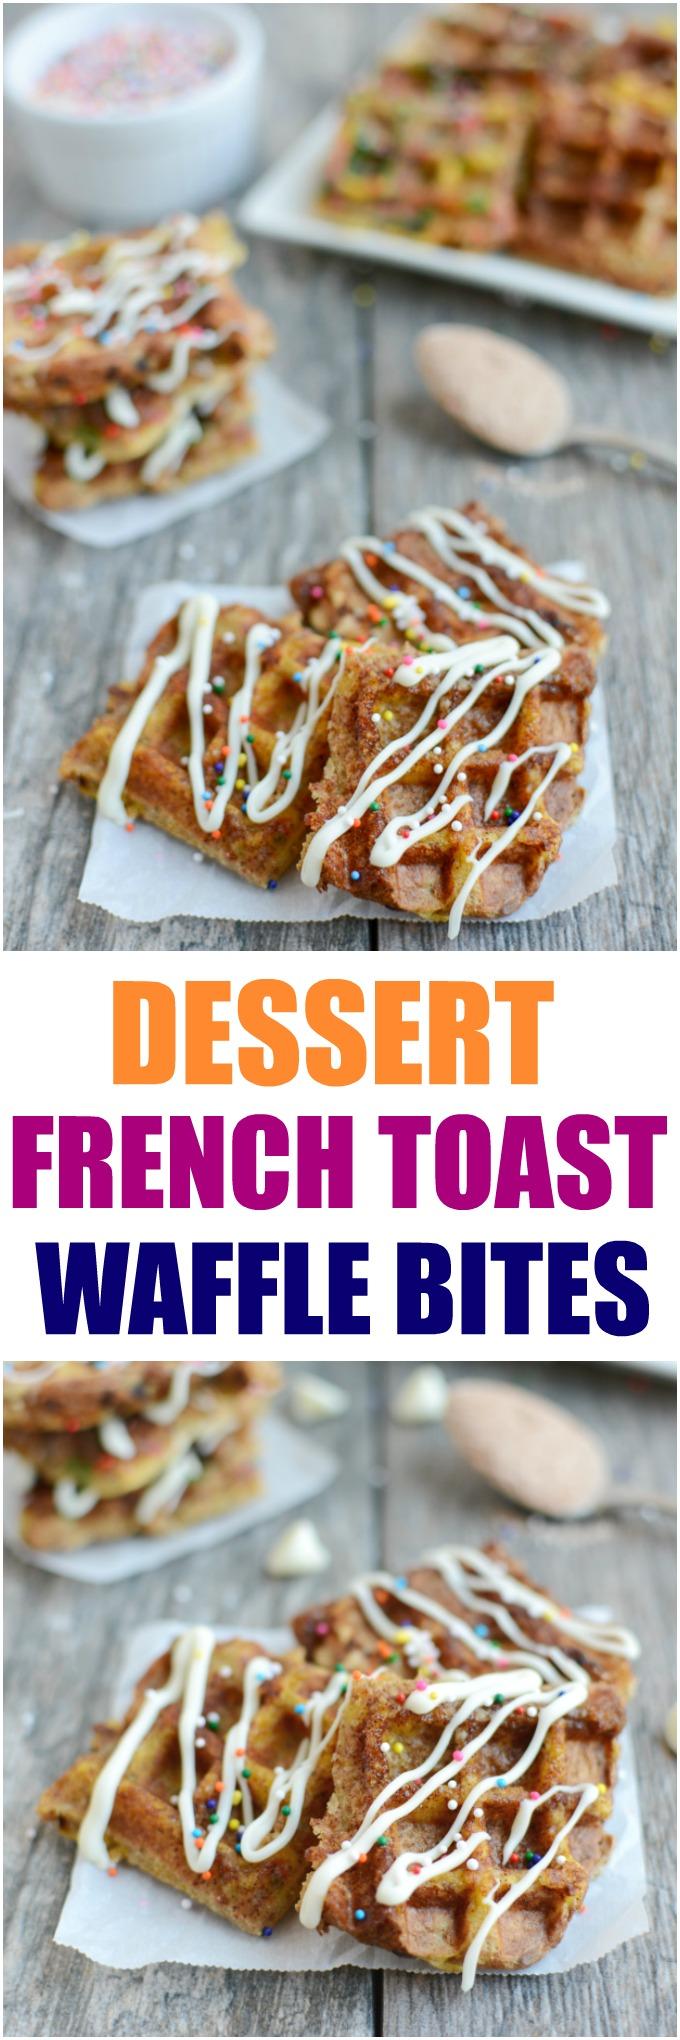 These Dessert French Toast Waffle Bites are a kid-friendly treat that makes a fun, healthy dessert alternative to cookies or cake.